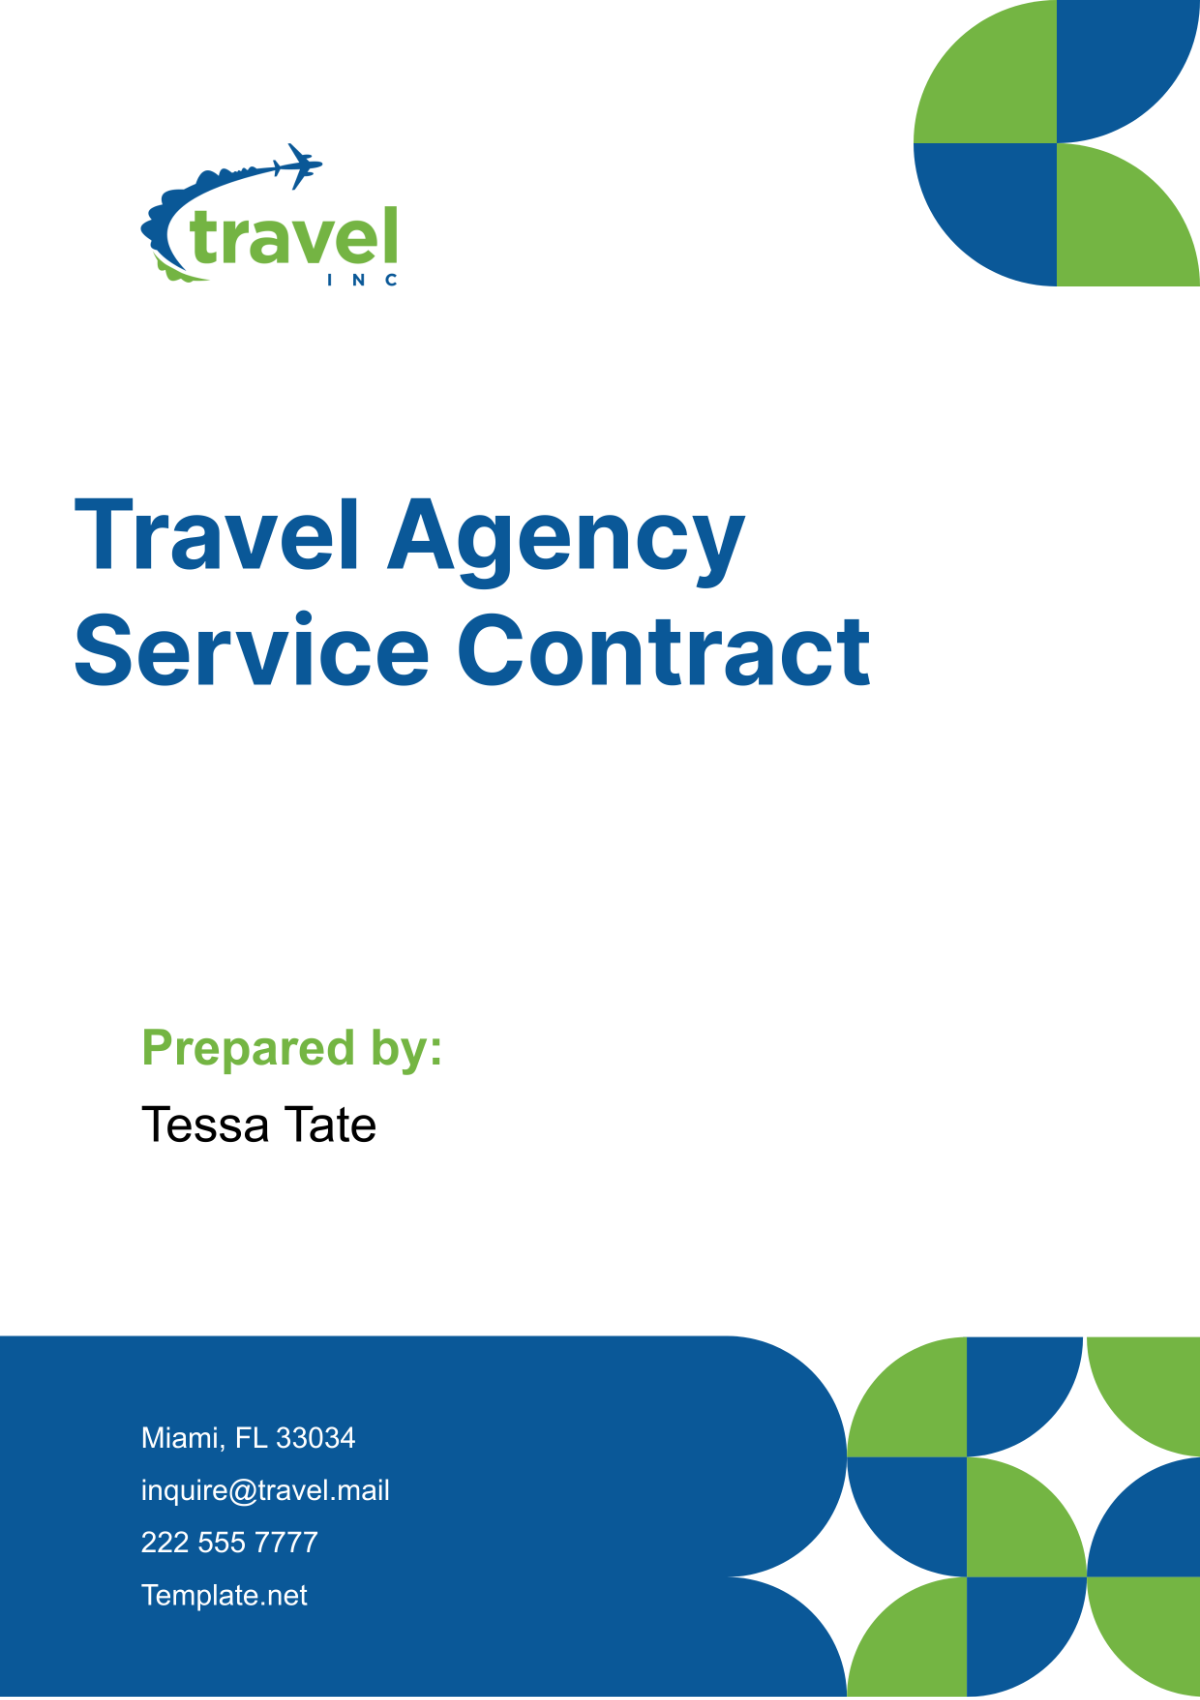 Travel Agency Service Contract Template